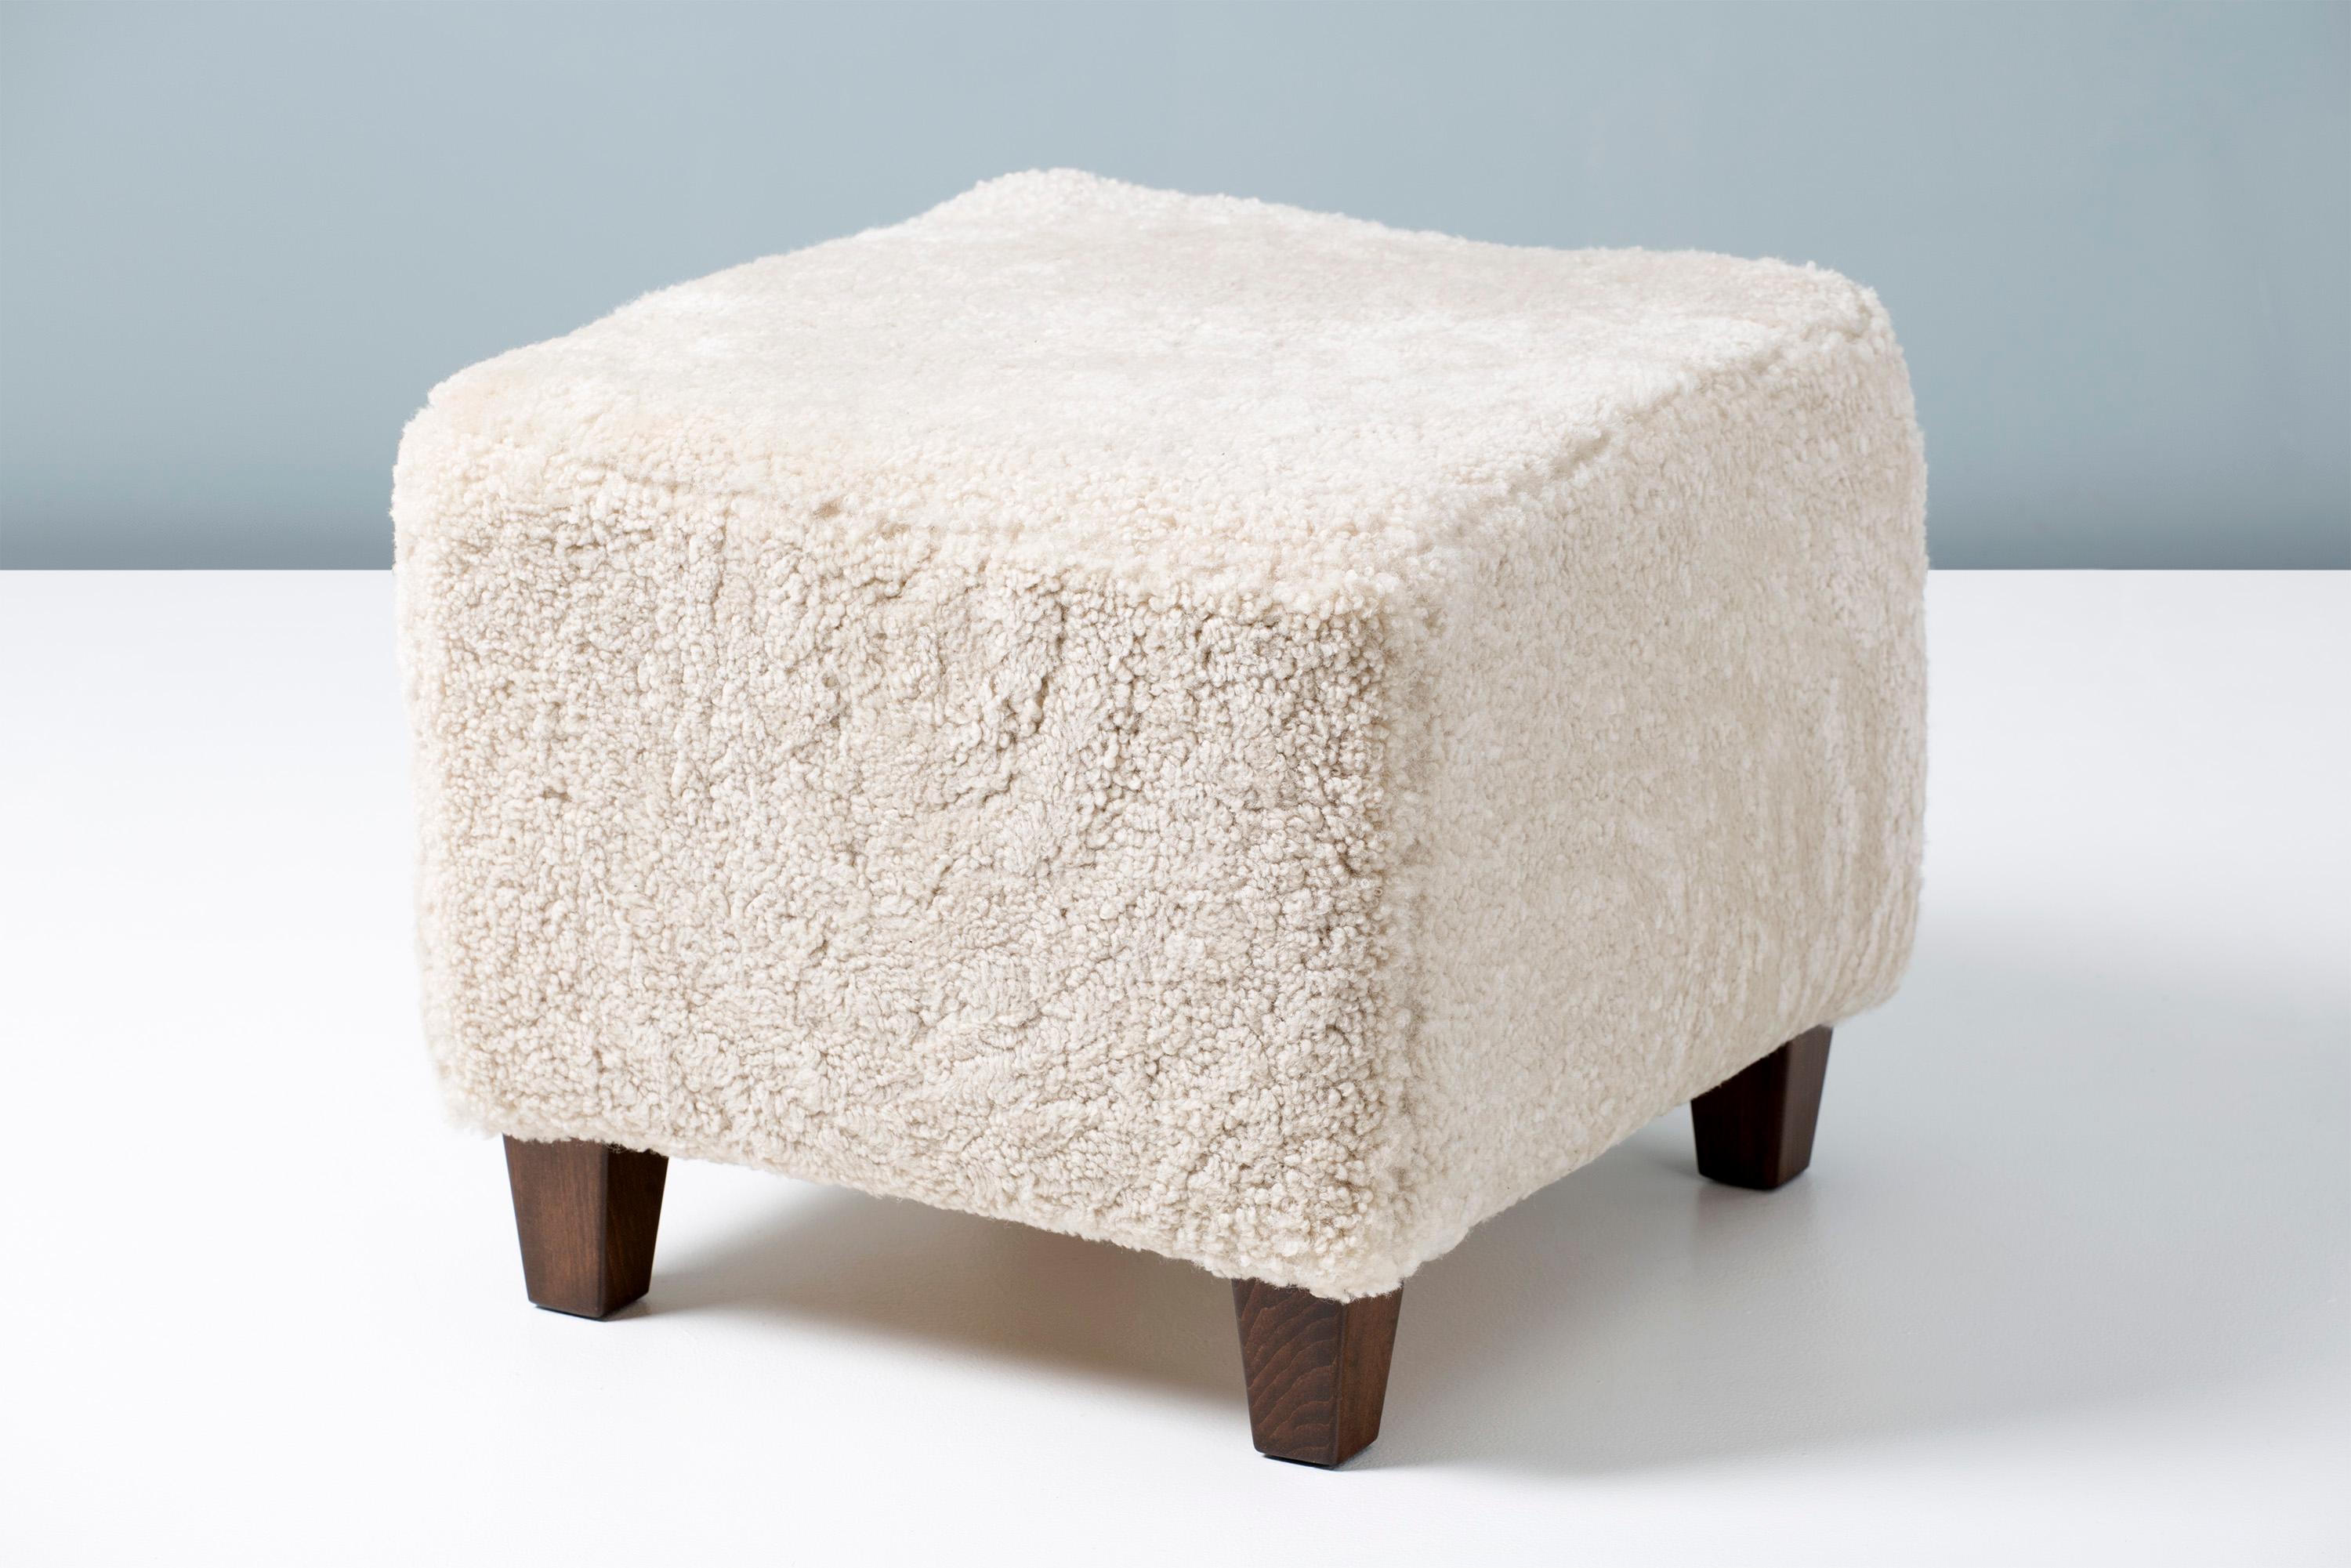 A custom made sheepskin ottoman on hardwood base with stained beech legs. The foam body is covered in premium, tufted Australian shearling. 

This item is made to order in our London workshop, multiple pieces are available by request.